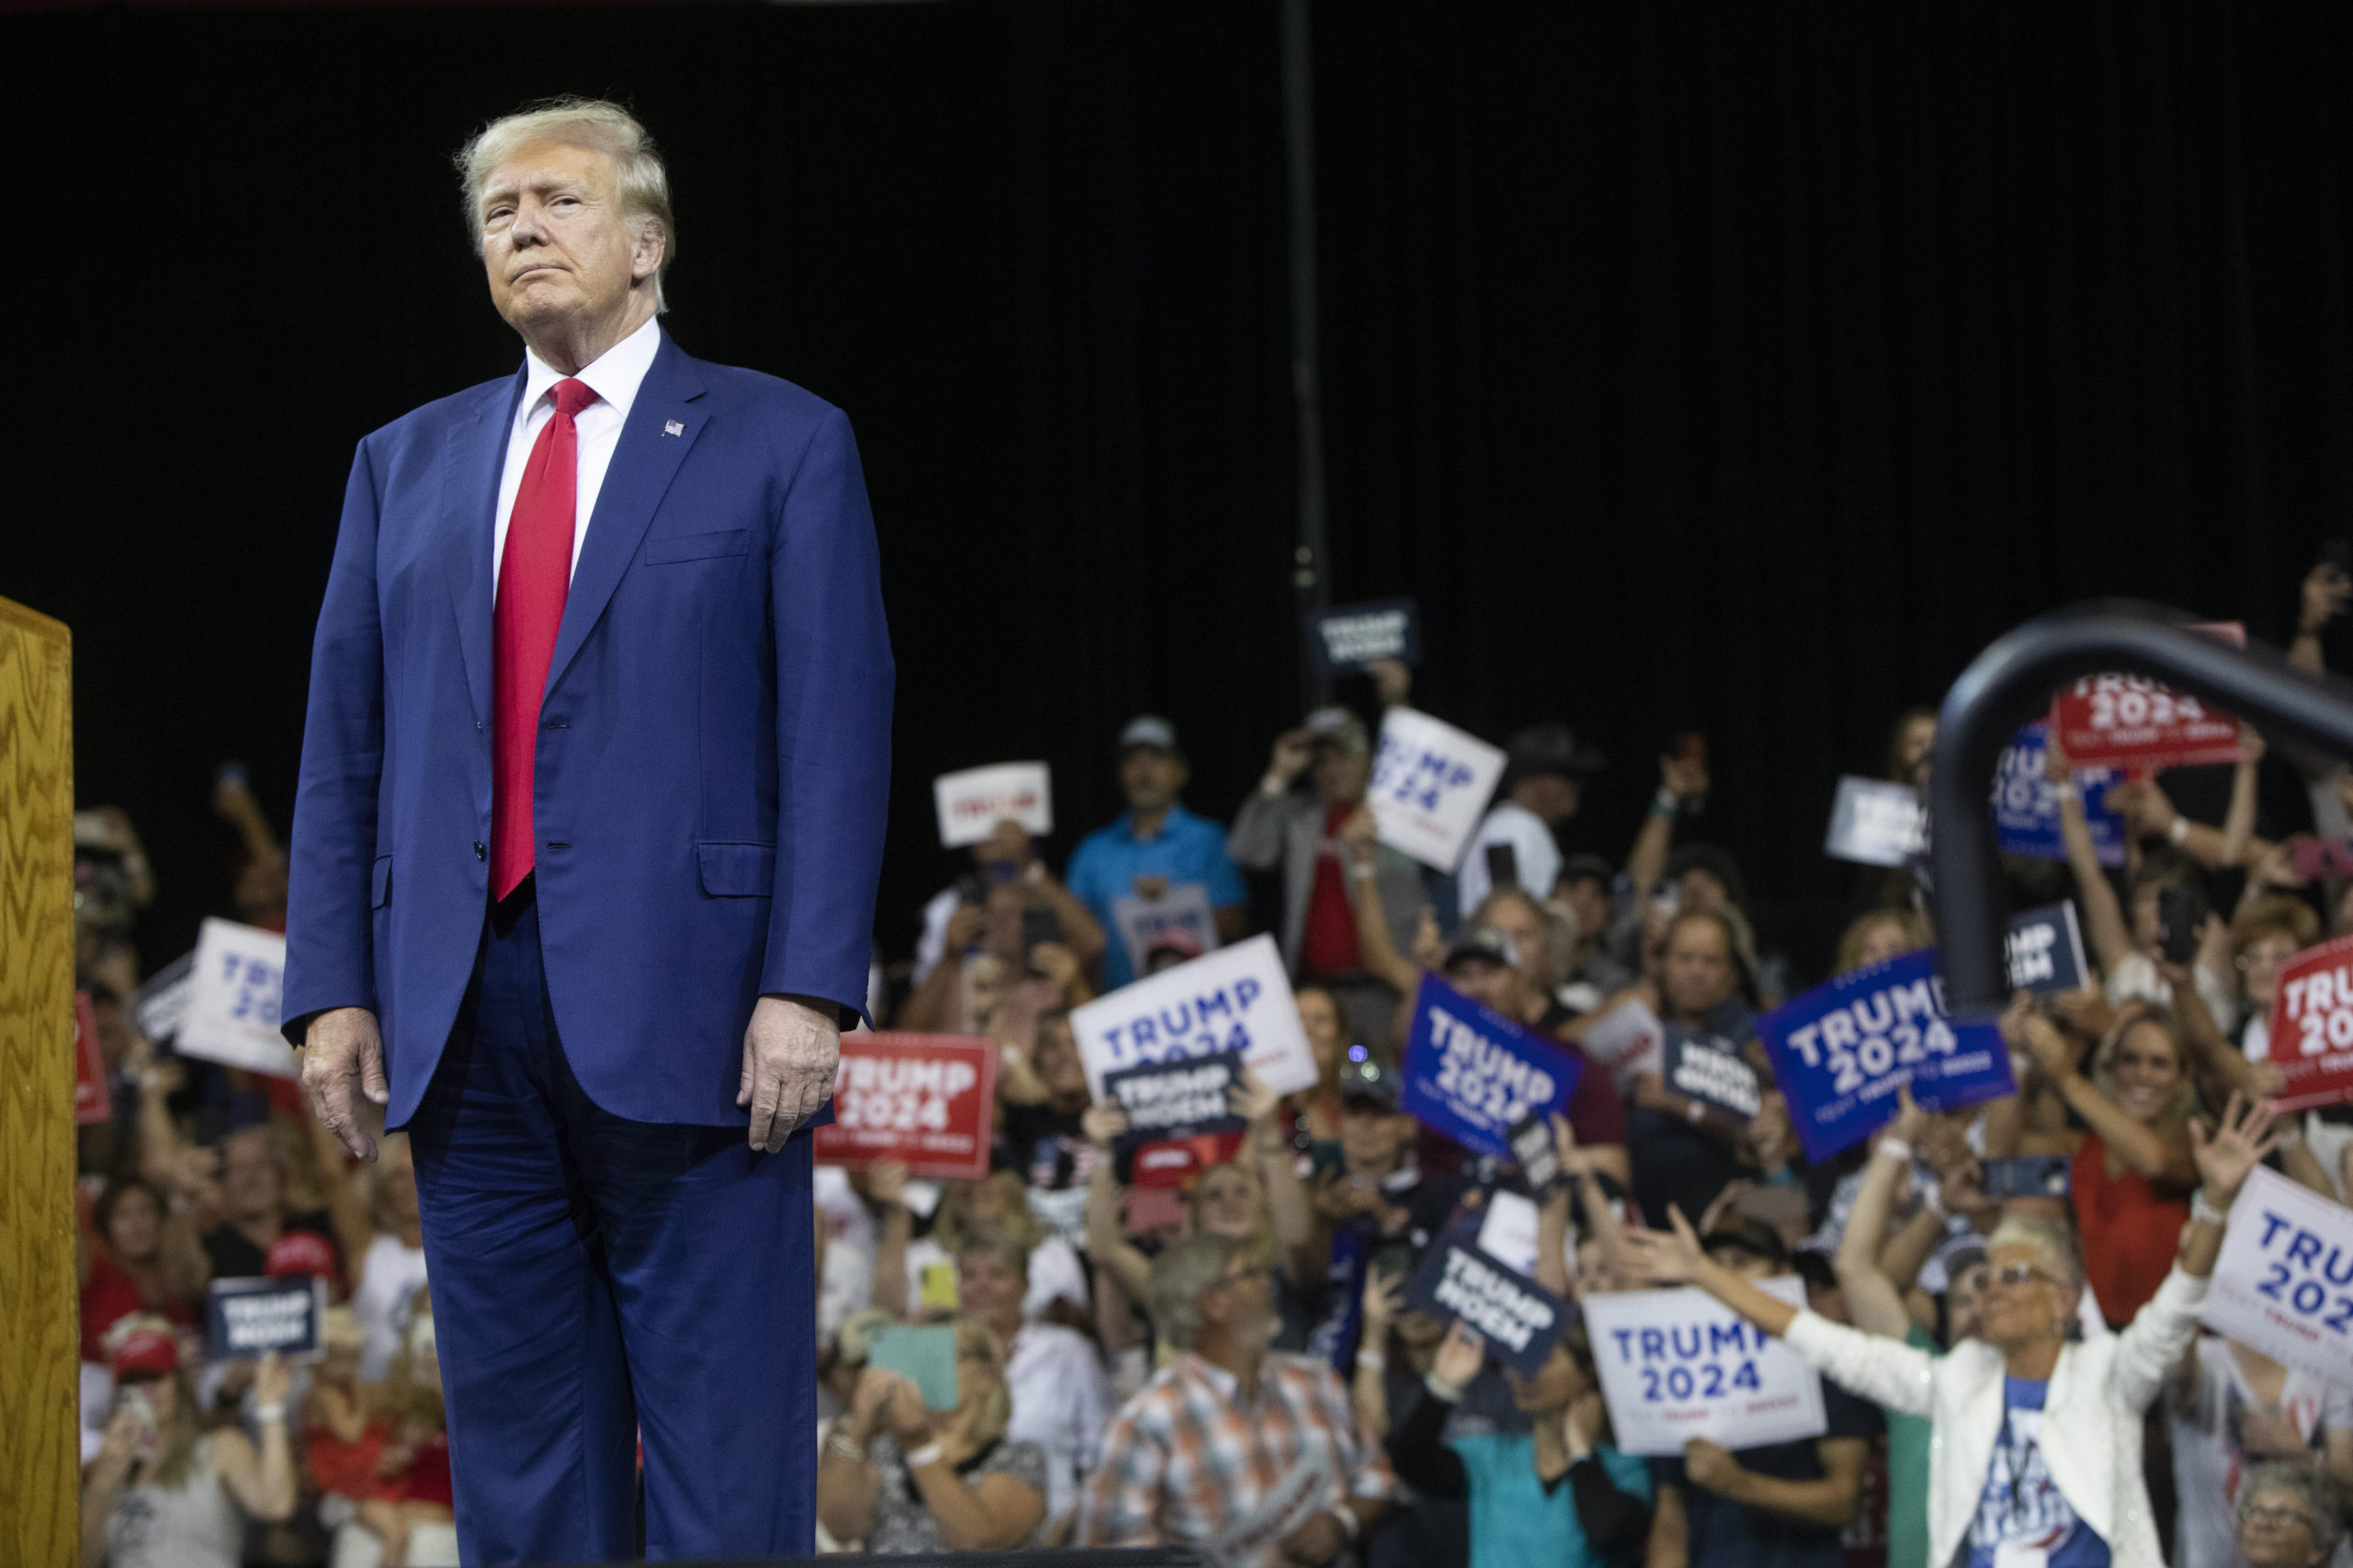 Former President Donald Trump stands as the crowd cheers at the South Dakota Republican Party Monumental Leaders rally in Rapid City, South Dakota, on Friday.